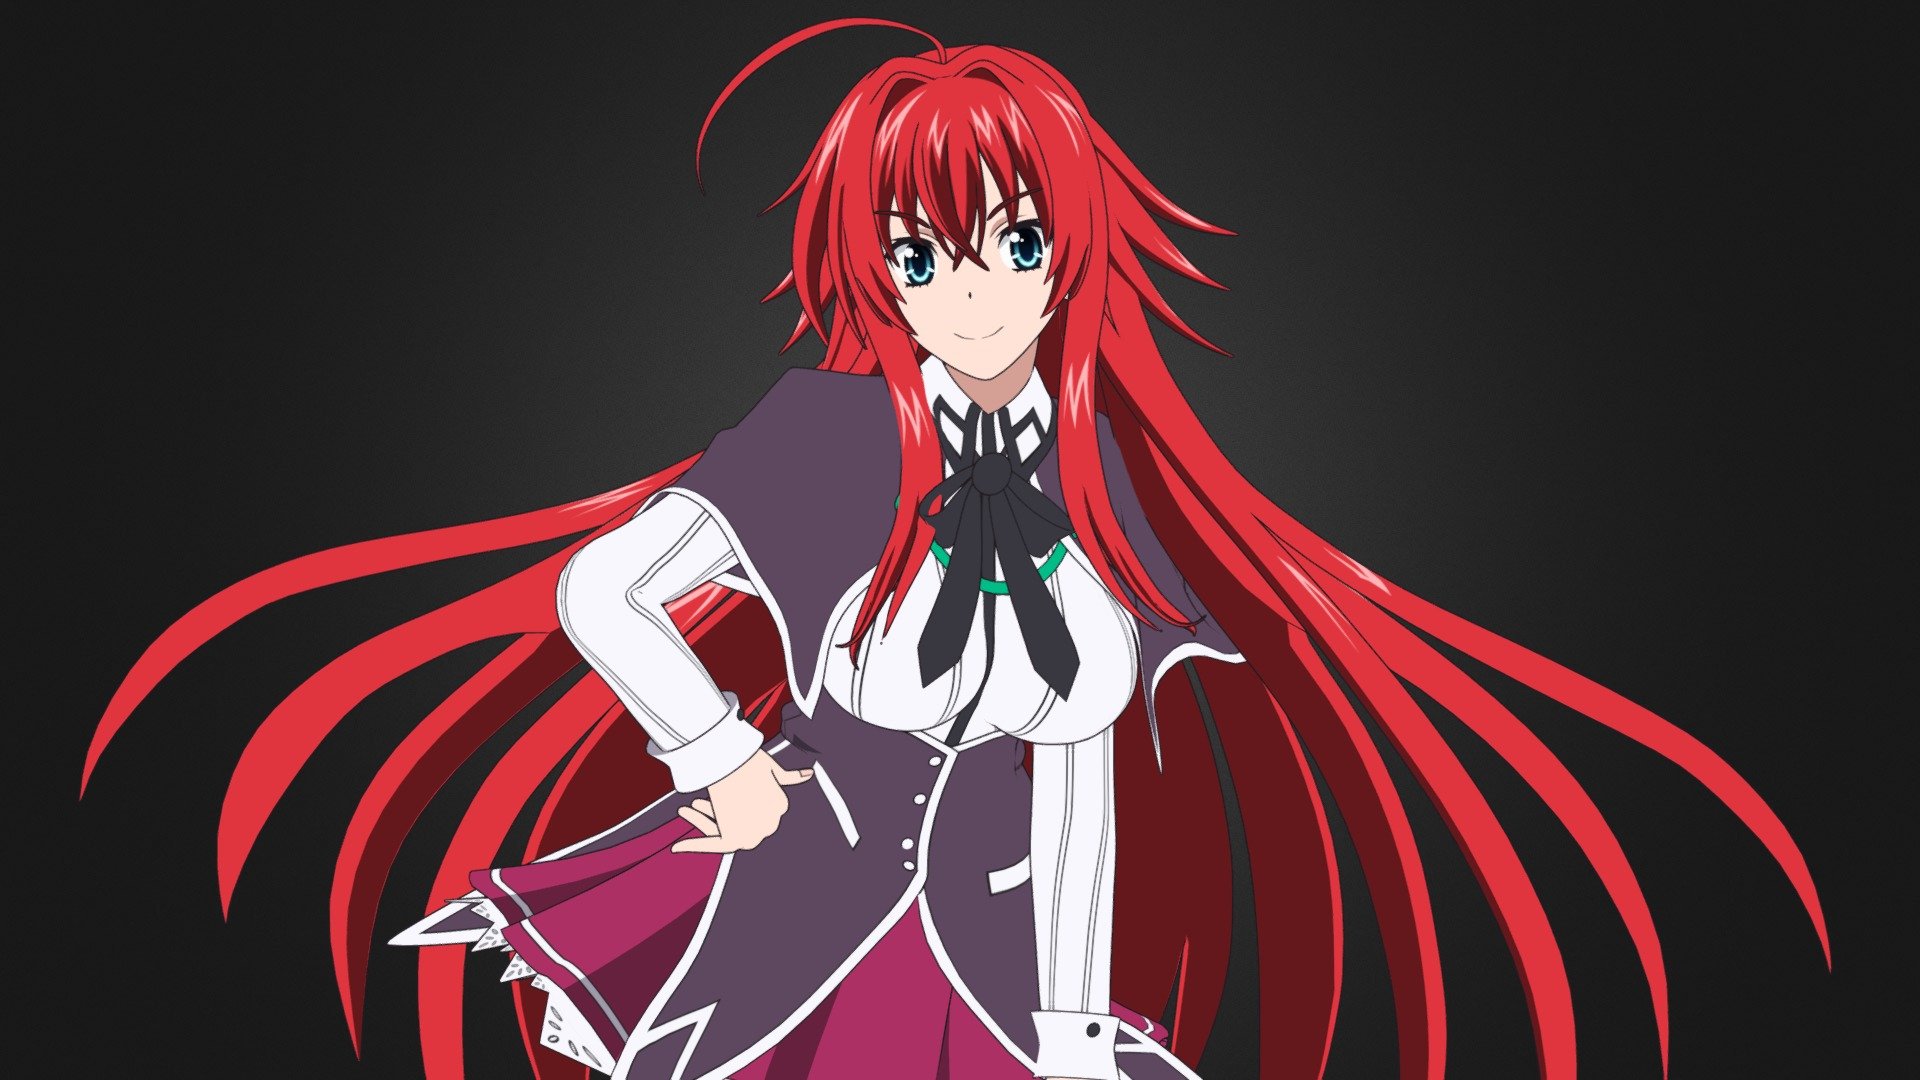 Rias Gremory character from the anime High School DXD

3D Model Rigged. In blend format, for Blender v3.3. EEVEE renderer, with nodes, material Toon Shader.

▬▬▬▬▬▬▬▬▬▬▬▬▬▬▬▬▬▬▬▬▬▬▬▬▬▬▬▬▬▬▬▬▬▬▬▬▬▬▬▬▬▬▬▬▬▬

Buy Artstation: https://www.artstation.com/a/22407948

Buy CGTrader: encurtador.com.br/bmBJV

▬▬▬▬▬▬▬▬▬▬▬▬▬▬▬▬▬▬▬▬▬▬▬▬▬▬▬▬▬▬▬▬▬▬▬▬▬▬▬▬▬▬▬▬▬▬

Contents of the .ZIP file:

● Folder with all textures in .tga Format.

● .blend file with the complete 3D Model.

Contents of the .blend file:

● Full body, no deleted parts.

● Individual Hair, separated from the body.

● Pieces of Clothing, separated from the body. (Individuals, Can be removed)

● Complete RIG, with all bones for movement. (Metarig Rigify Armature)

● Materials configured with nodes.

● UV mapping.

● Textures embedded in the .blend file.

● Modifiers. (Subdivide, Solidify and Outline for contours) - Rias Gremory - ​High School DXD - 3D model by Gilson.Animes 3d model